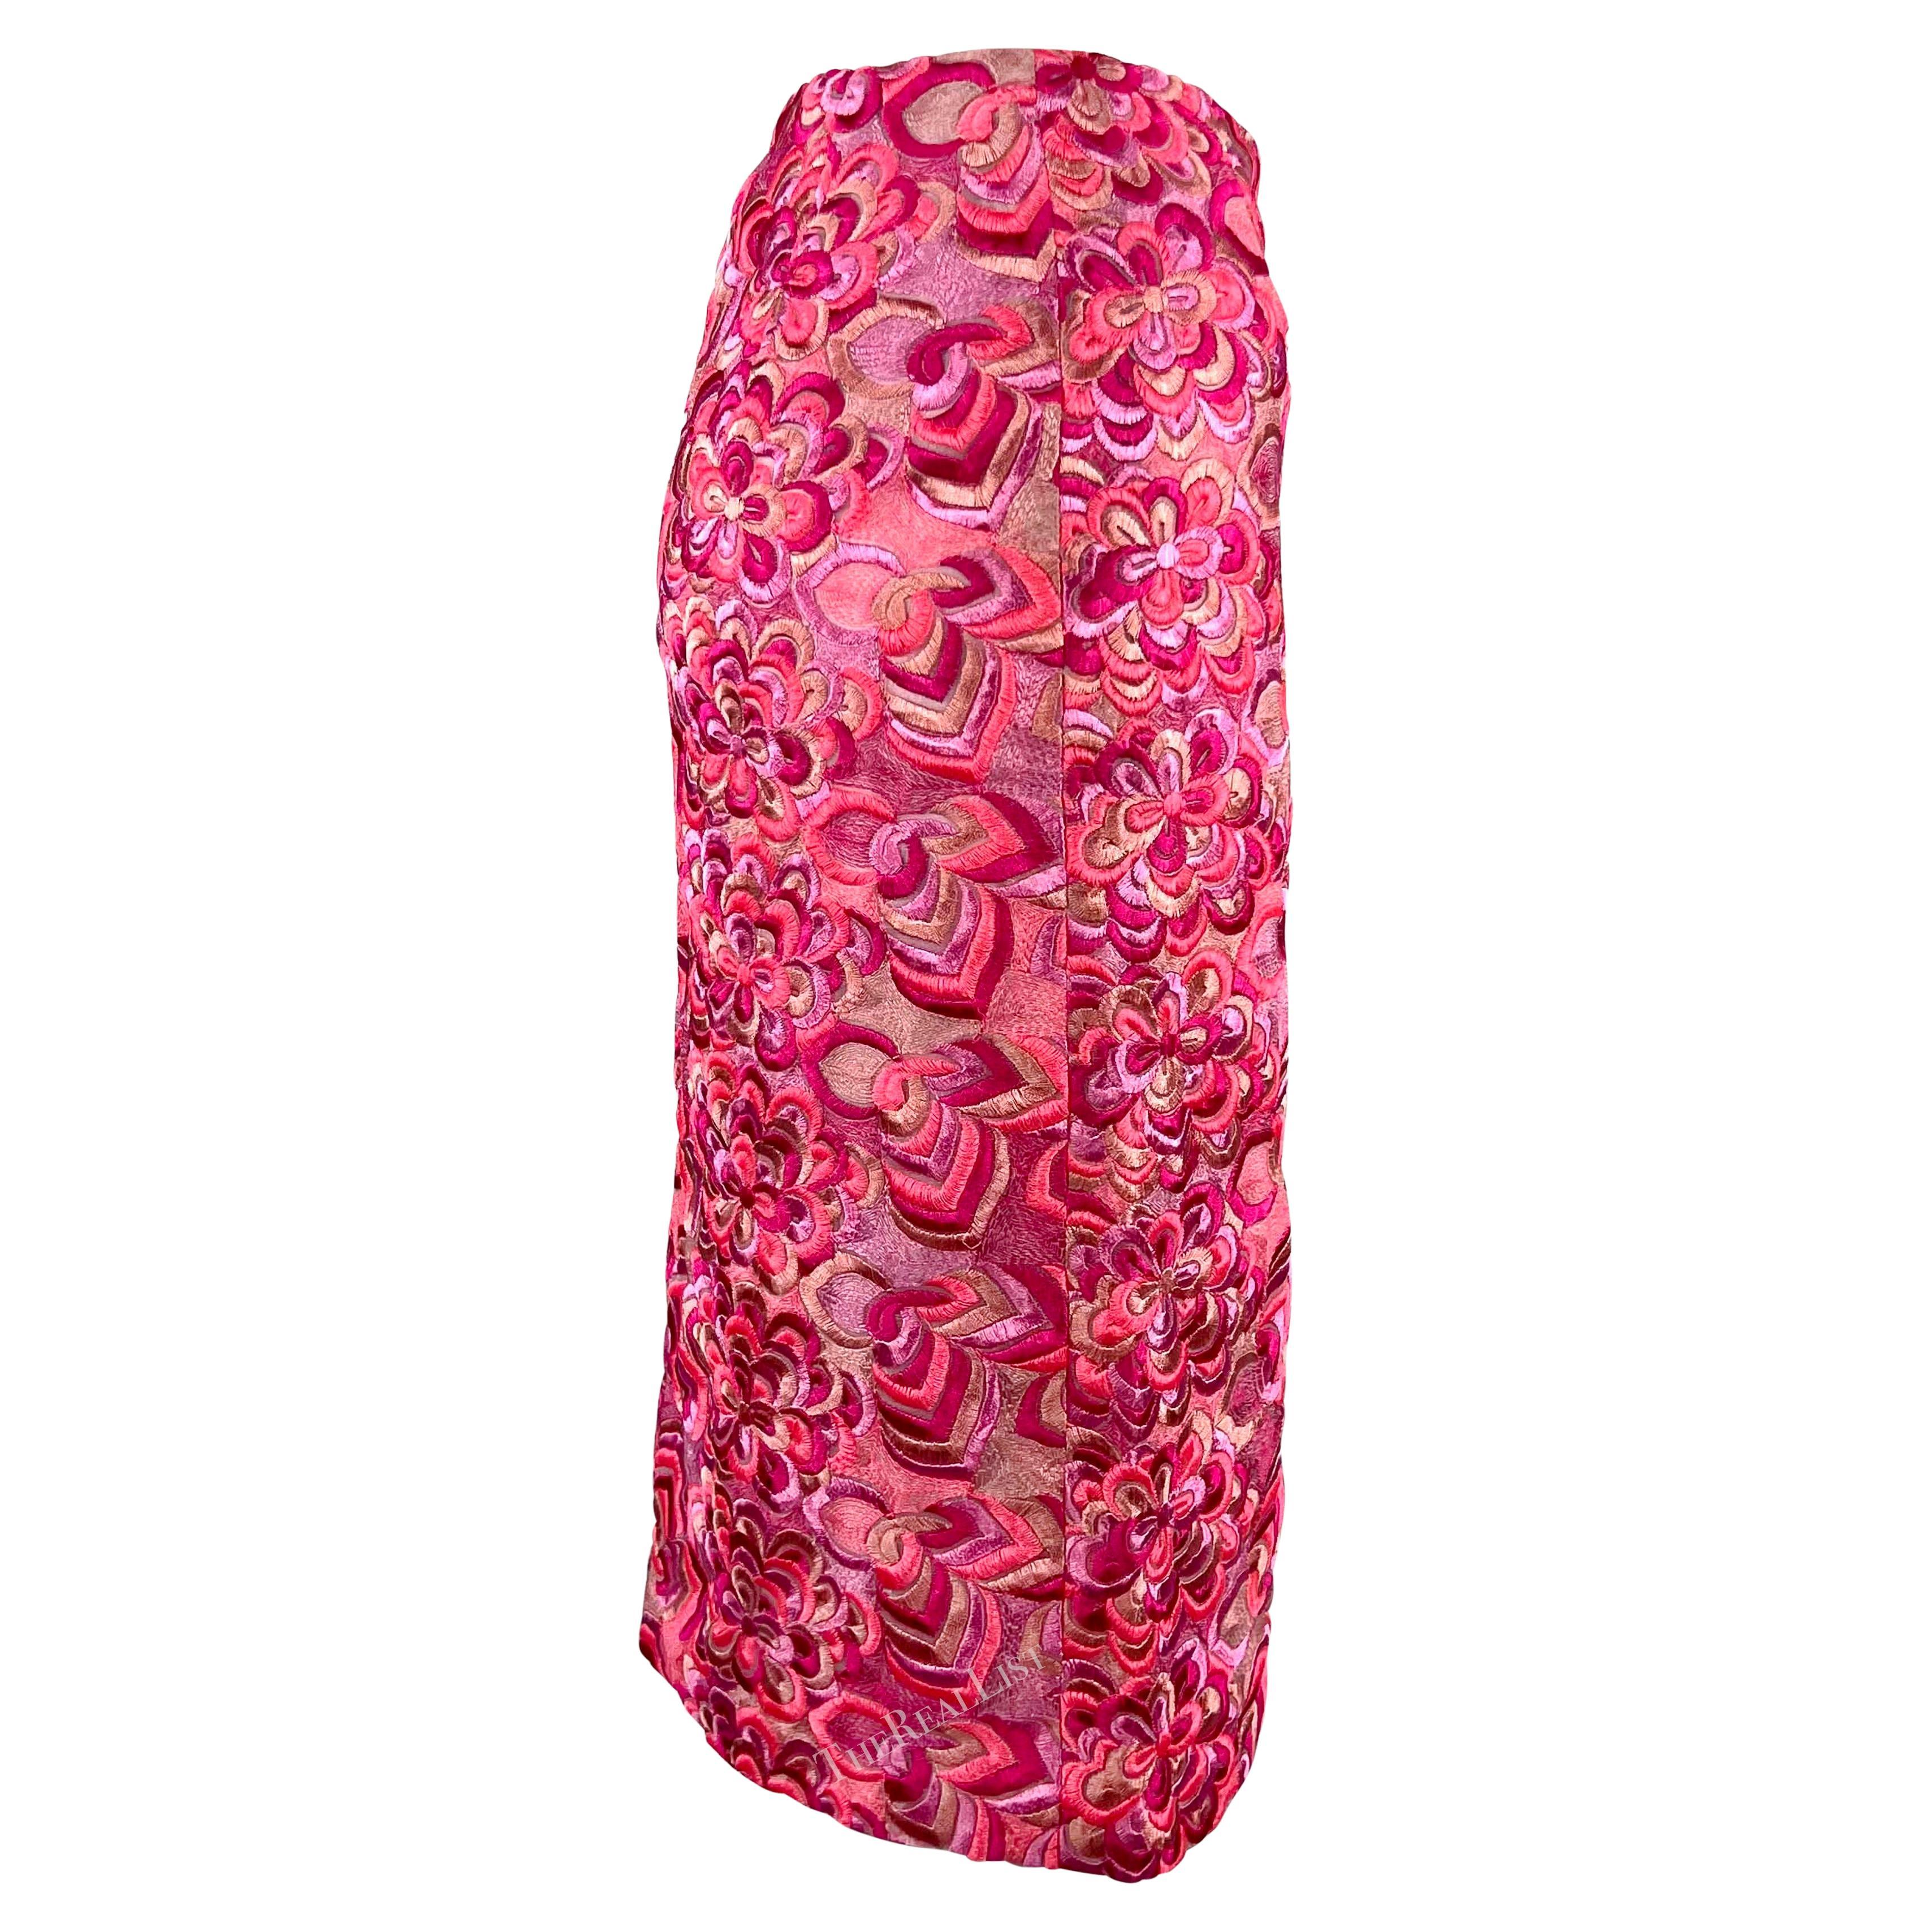 S/S 2000 Gianni Versace by Donatella Versace for Gianni Versace for Gianni Versace for Gianni Versace for Gianni Versace by Donatella Neon Pink Floral Embroidered Skirt en vente 2